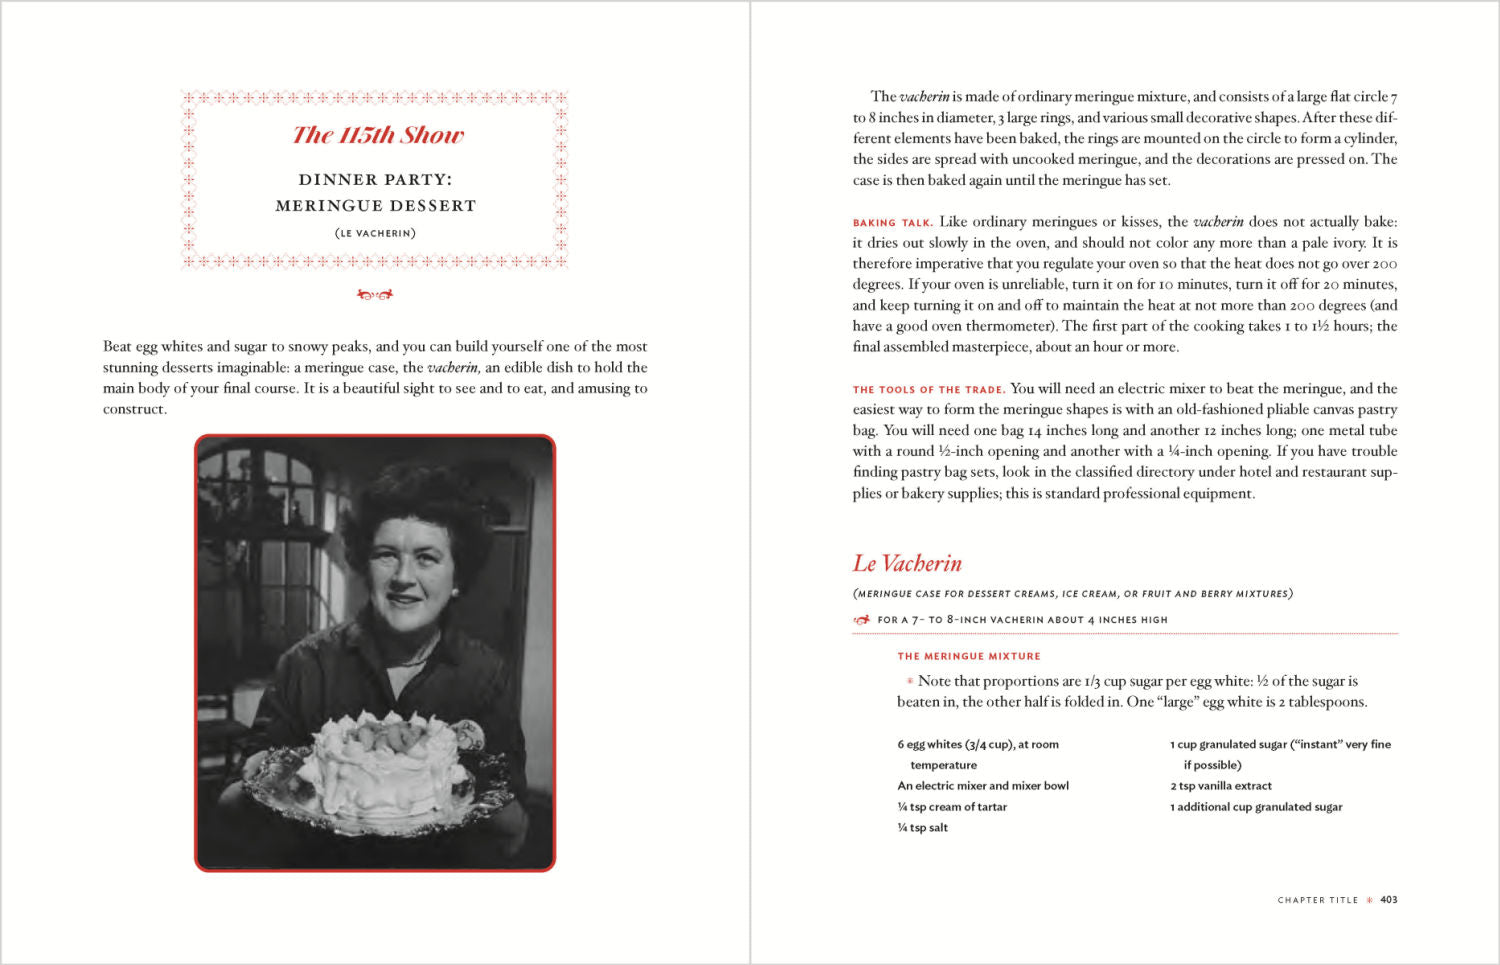 The French Chef Cookbook / JULIA CHILD - COMING NOVEMBER 21ST!